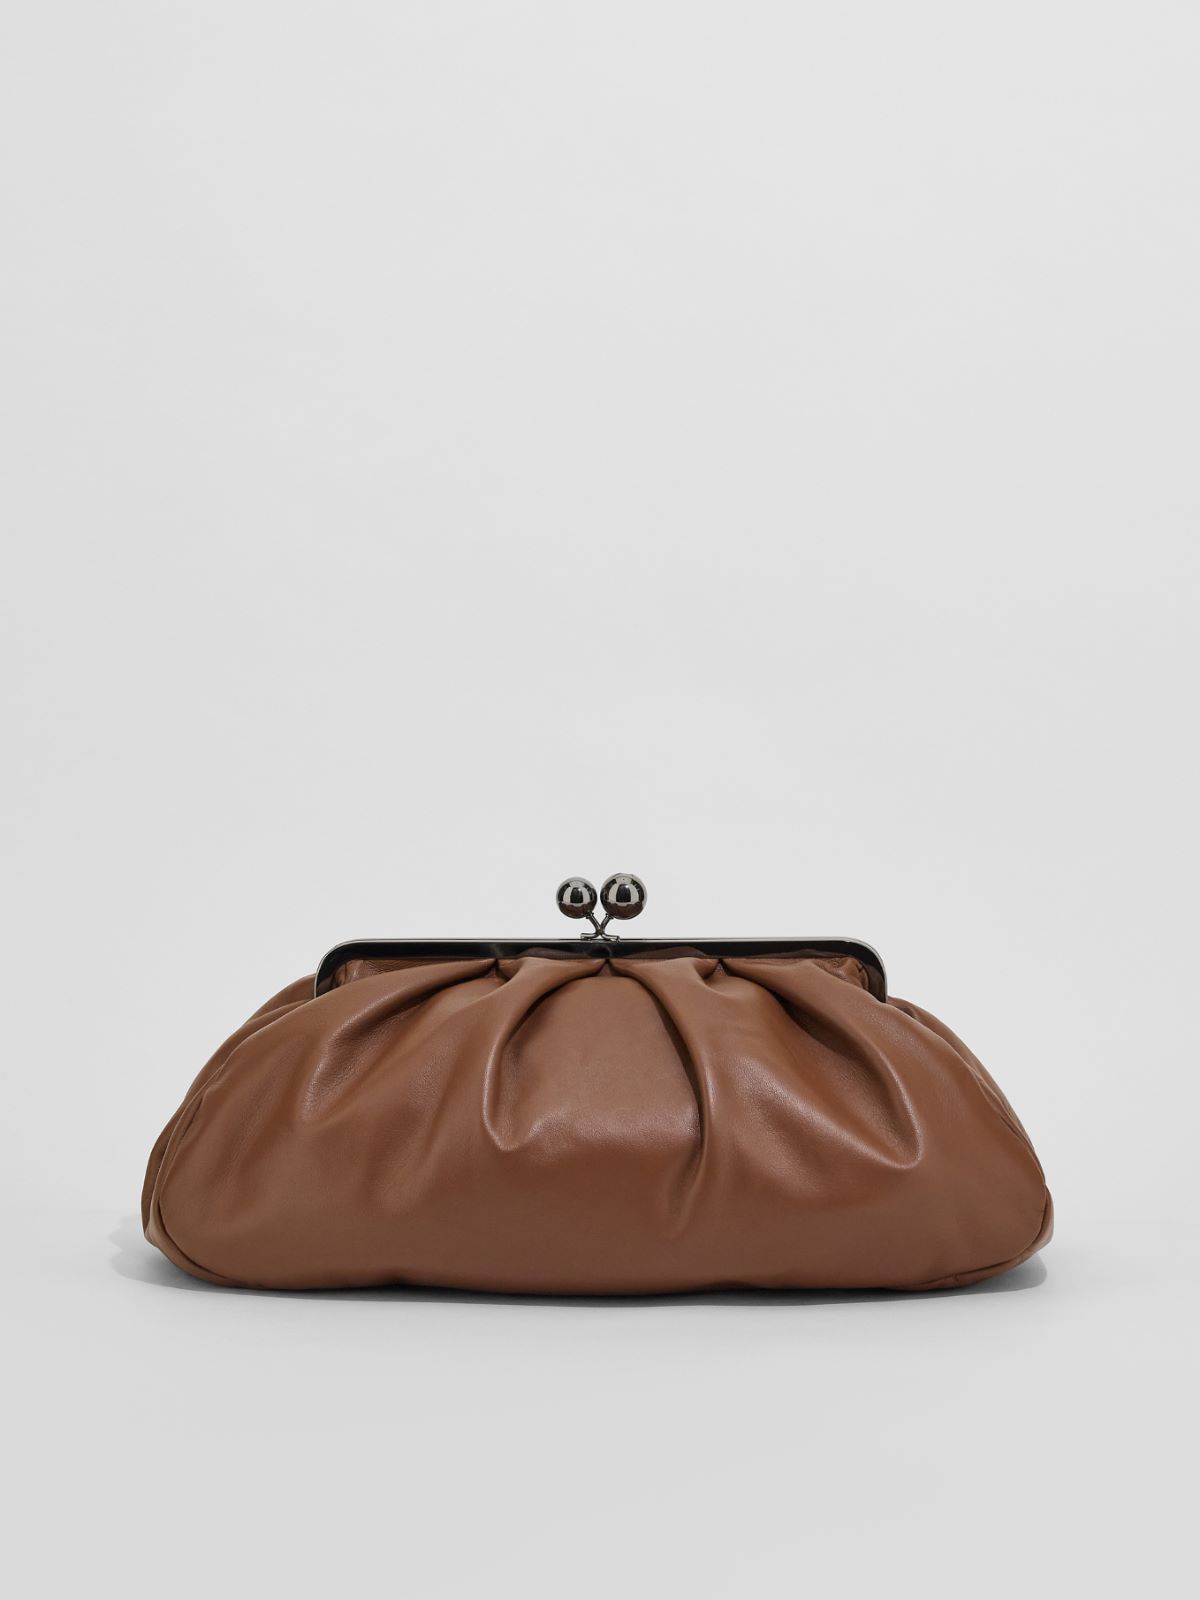 Large leather Pasticcino Bag  - TOBACCO - Weekend Max Mara - 3